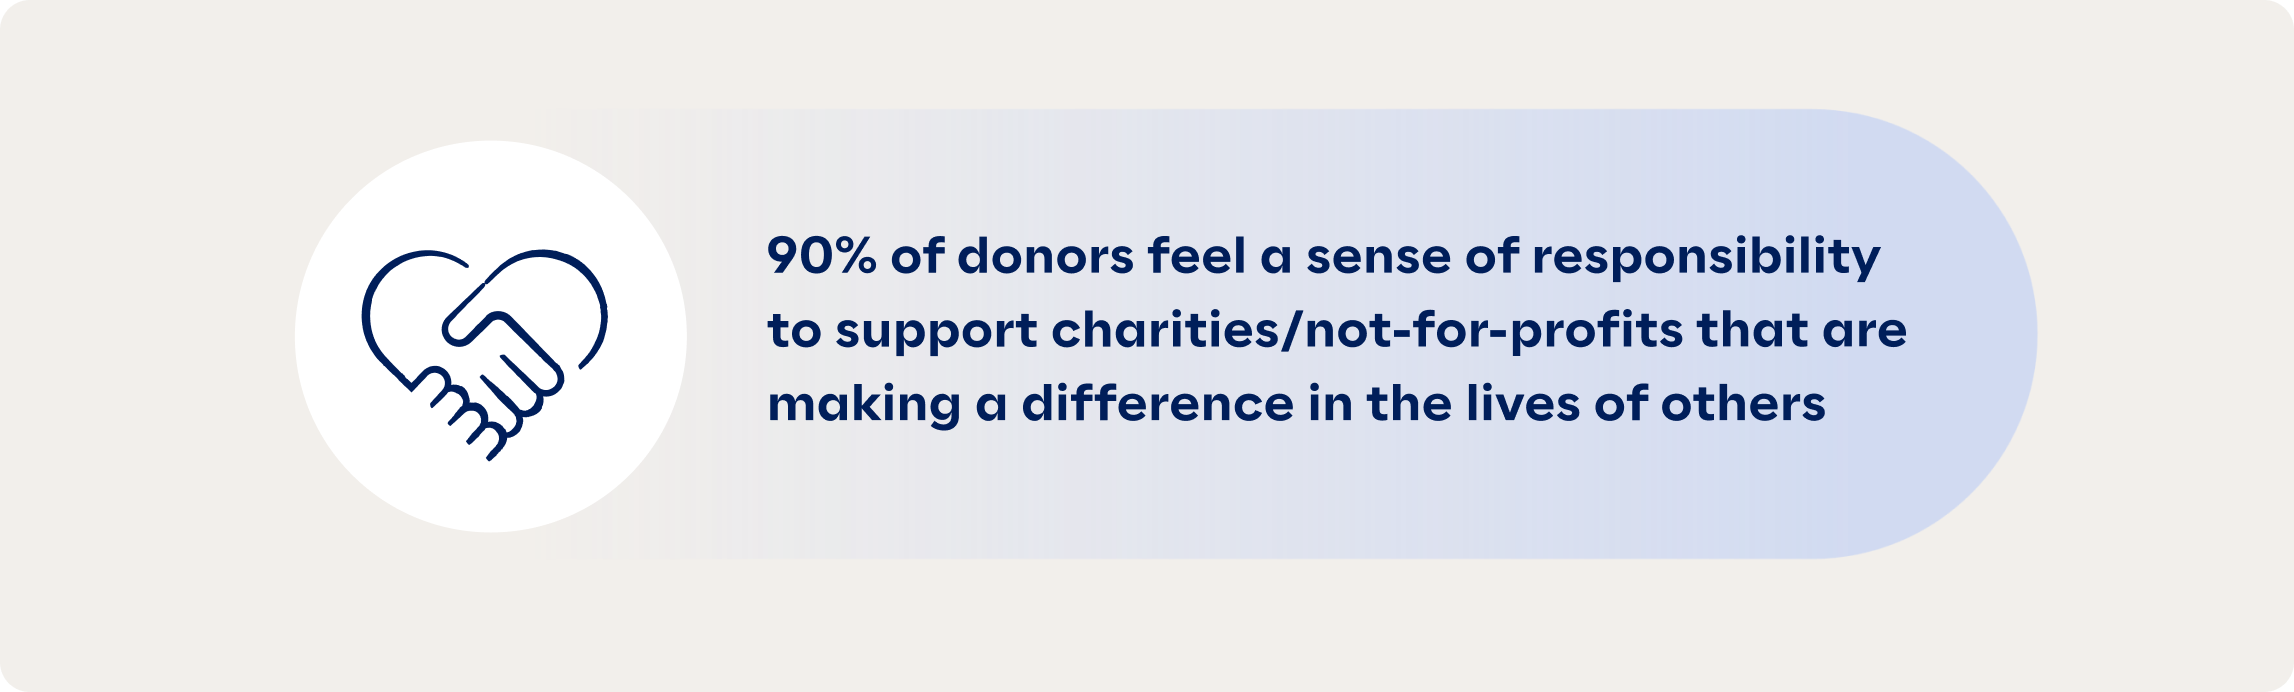 Donors feel responsible